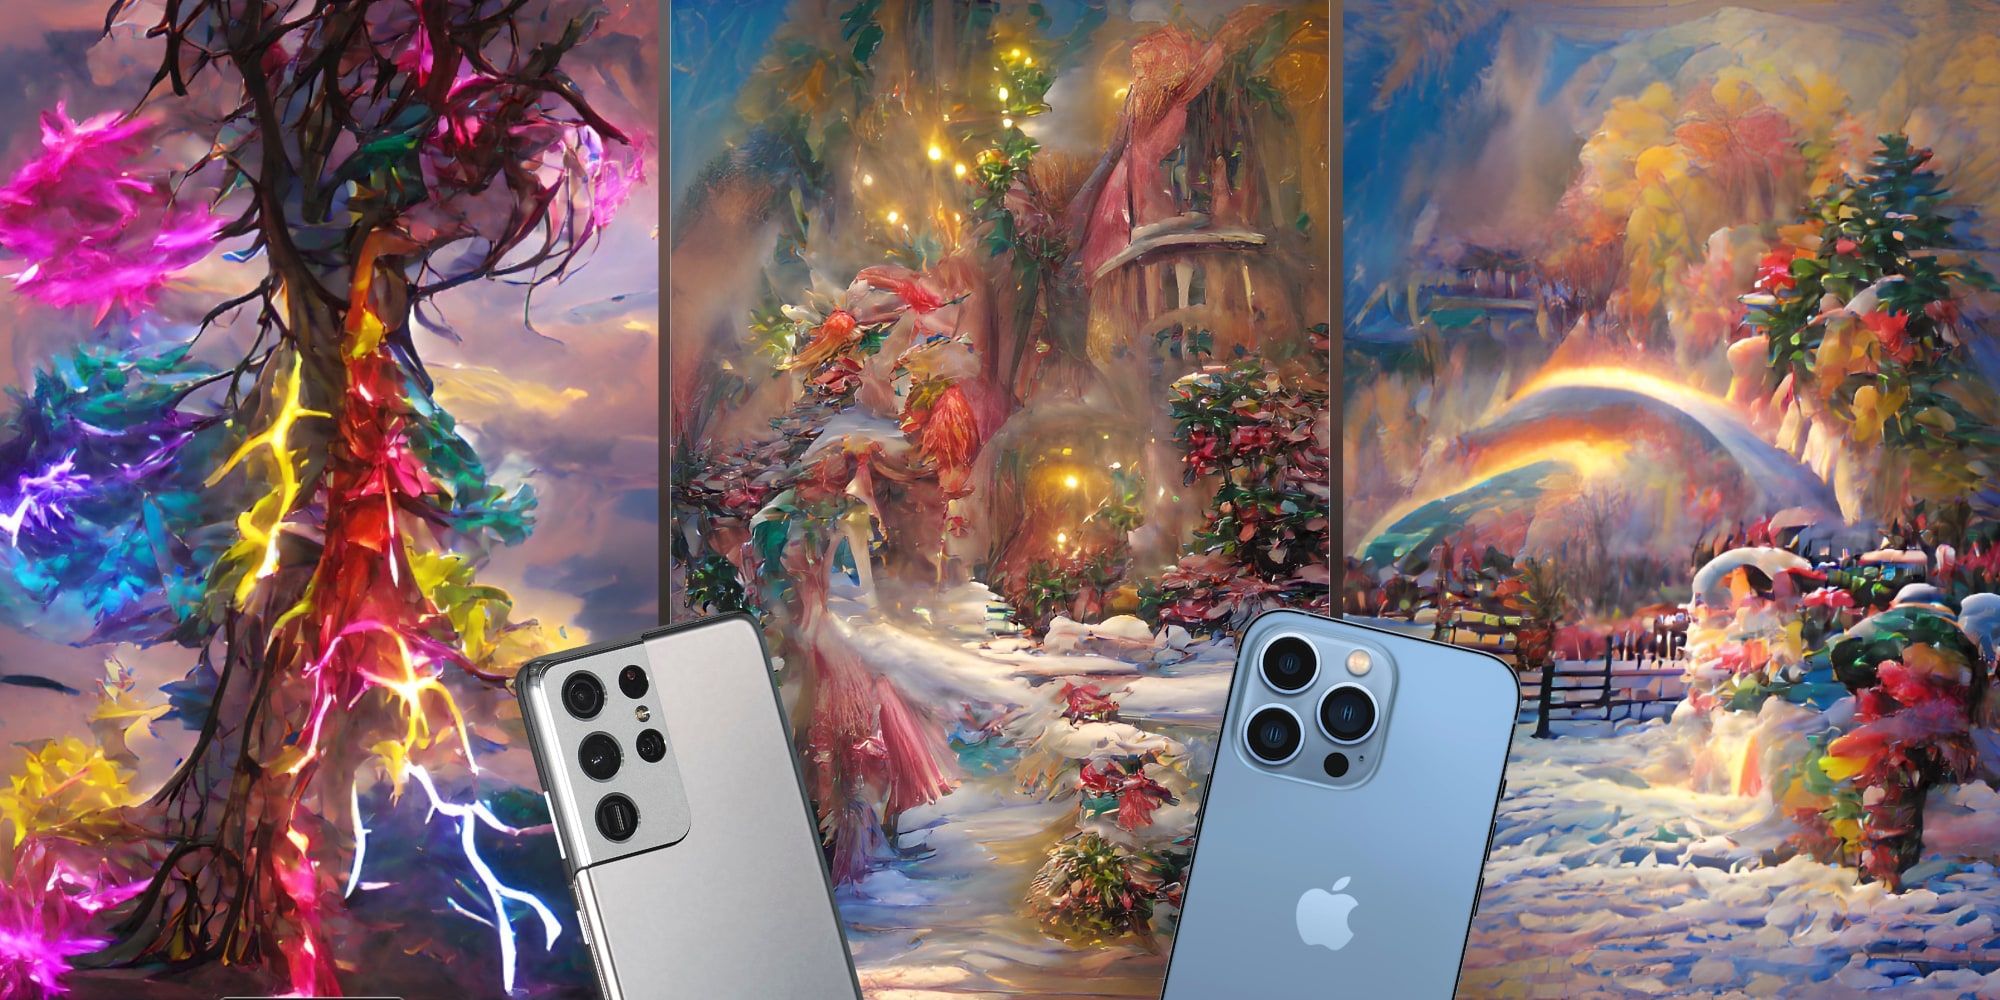 Apple iPhone 13 Pro And Samsung Galaxy S21 Ultra Over AI Art From Dream By Wombo App